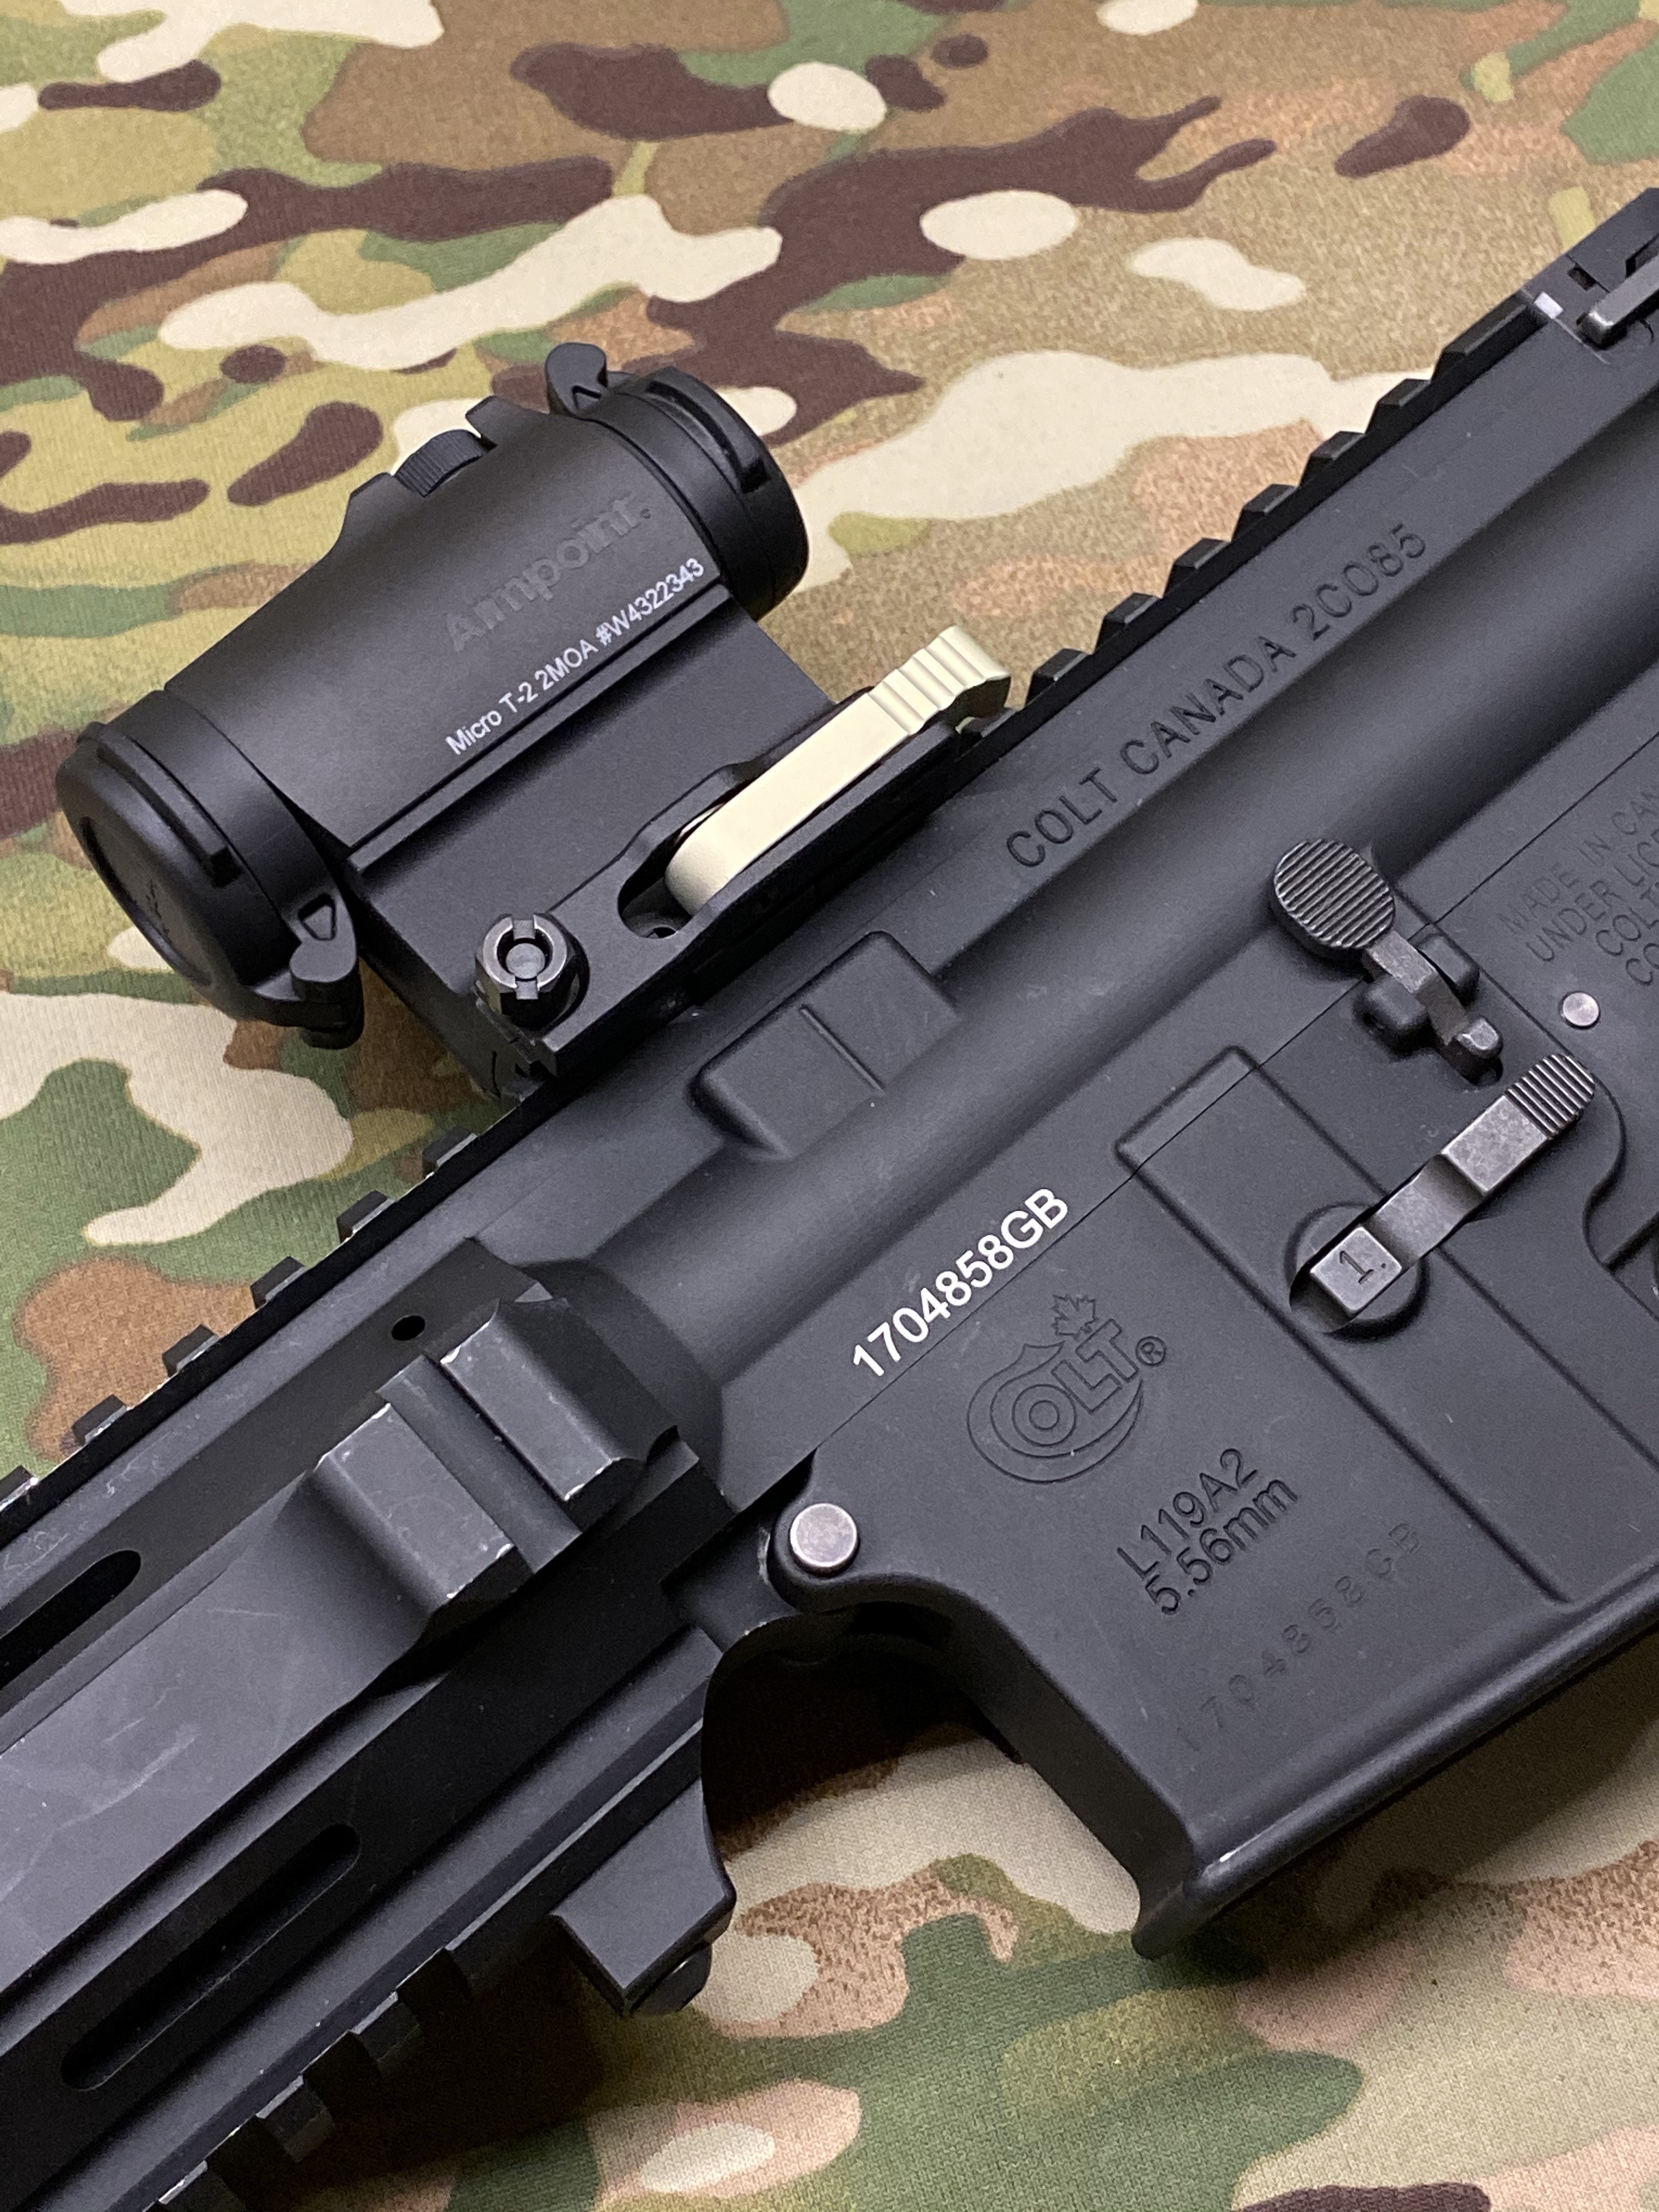 REVIEW: Aimpoint Micro T-2 – The Reptile House